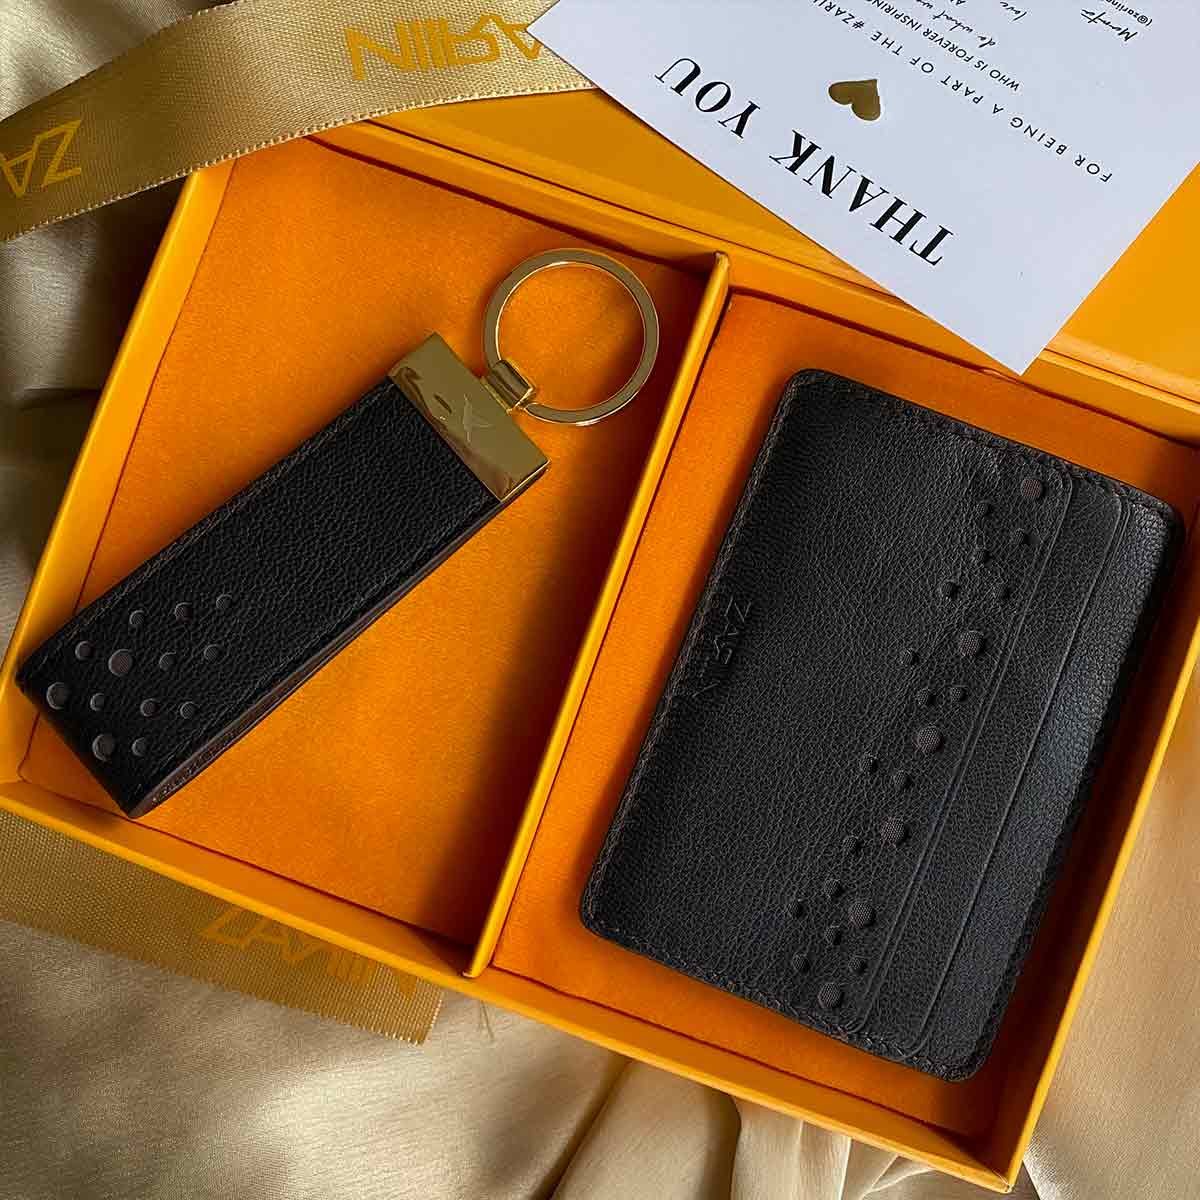 Buy Artisanal Leather Card Holder and Key Chain Gift Box Online in